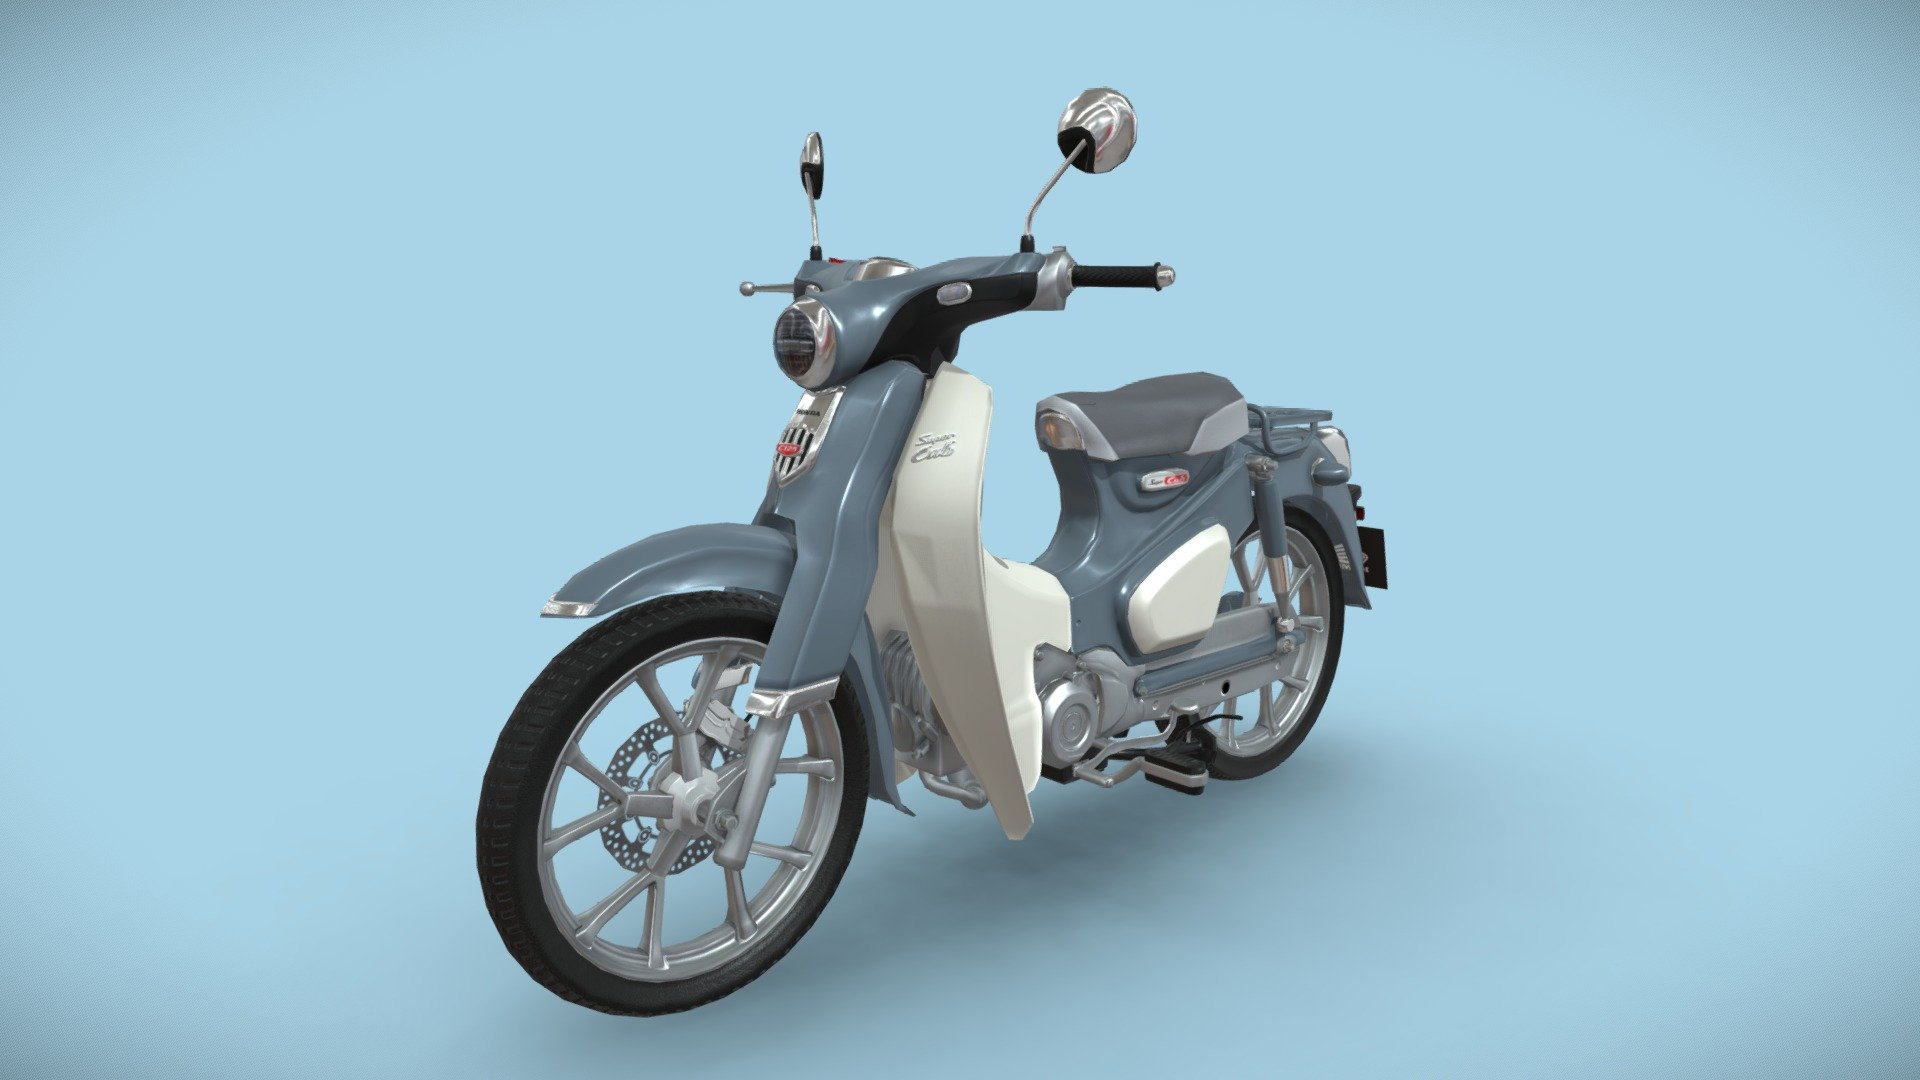 This is Honda Super Cub C125 3d Model.
This is in Pearl Gray Color of Honda Super Cub C125.
The model was created in Maya 2018, rendered with Substance painter, Clean topology based on quads. Detailed High quality model.
All Materials in this pack are provide with all named.
Model Type: Polygonal
Polygons: 20,556
Vertices: 22,195
Formats available: Maya ASCII 2018, Maya Binary 2018, FBX , OBJ
Textures: Color, Normal, Metallic, Roughness, Ambient Occlusion, Displacement and AlphaTexture Resolution: 4096 x 4096 pixels
If the price is not suitable for you can contact me and discuss the price.
Please don't forget to rate the model.
Hope you like it!
Thank You 3d model